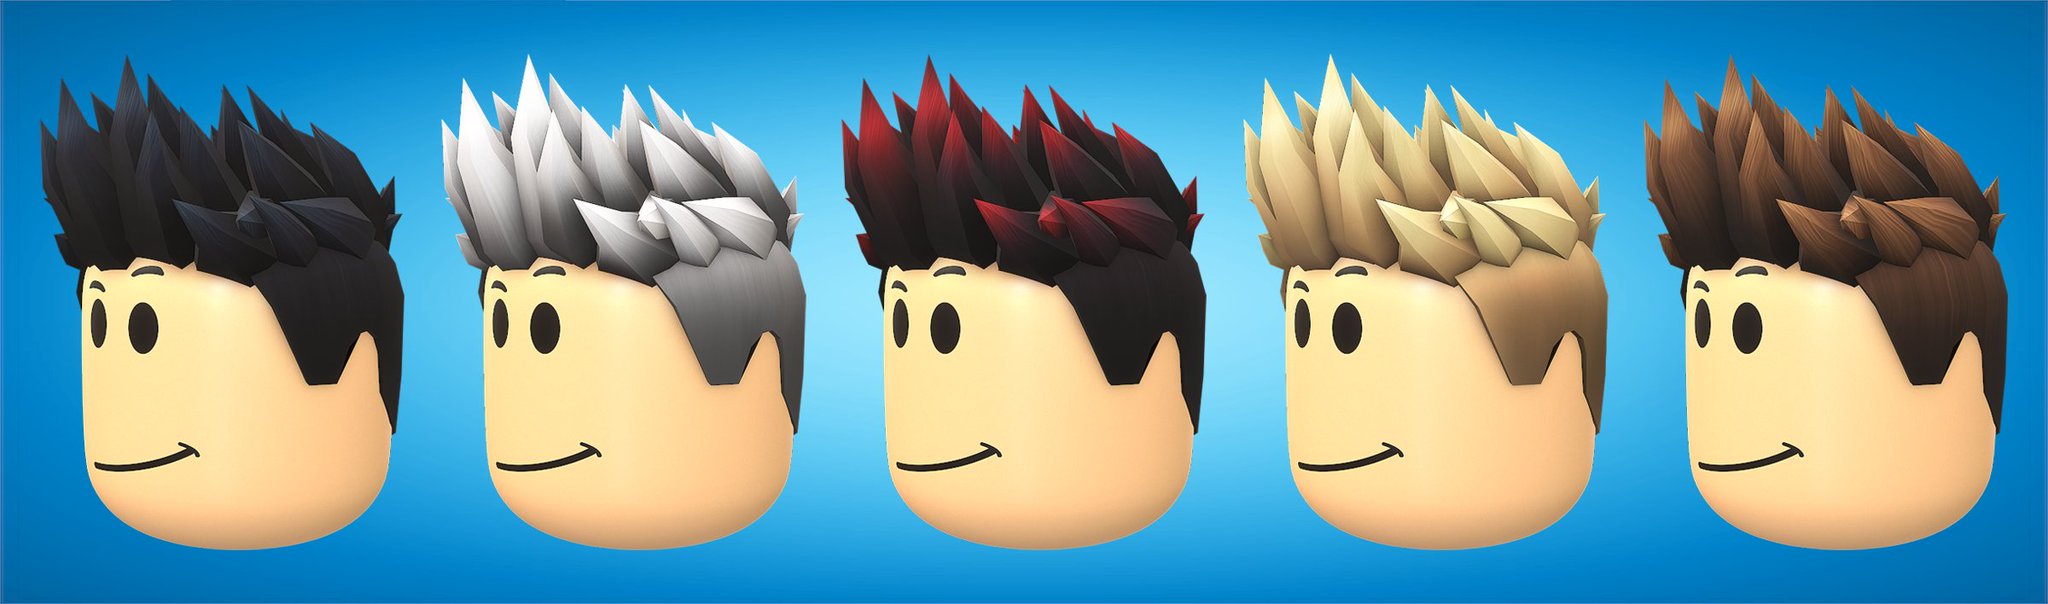 Youri Hoek On Twitter The First Wave Of My New Ugc Hair Series Is Out Now This Wave Features Spiky Undercuts You Can Find Them Using The Links Below Https T Co S8ftvce3kd Https T Co H7iaizhrsa Https T Co I0ghsopk1x - roblox yellow hair